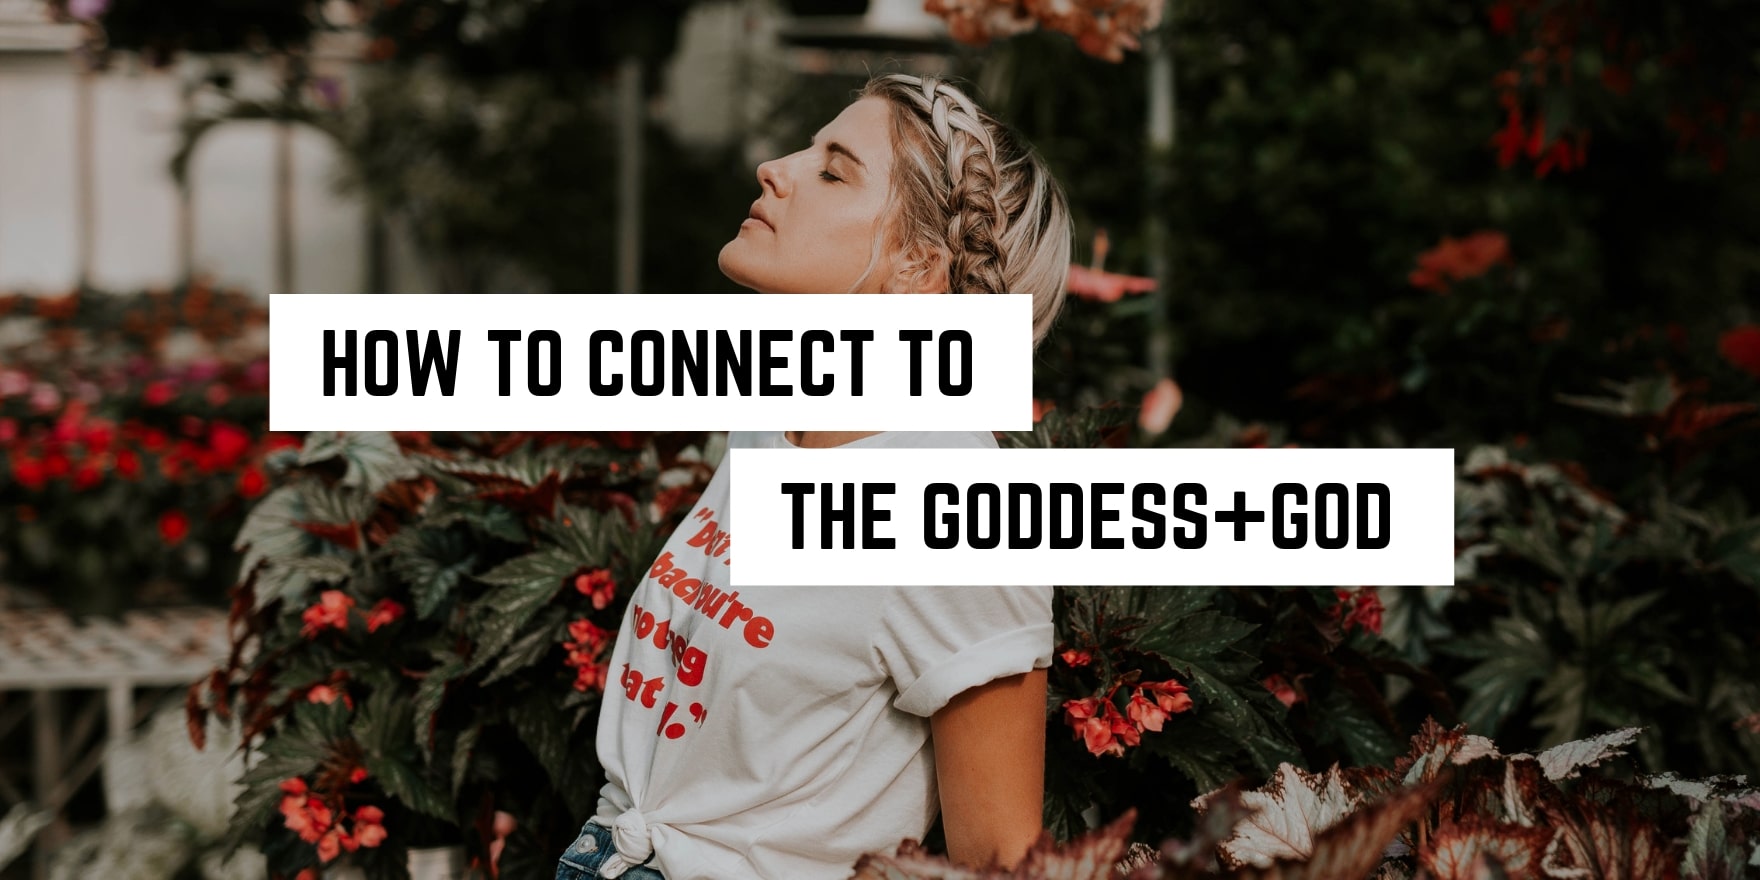 How to Connect to the Goddesses and Gods